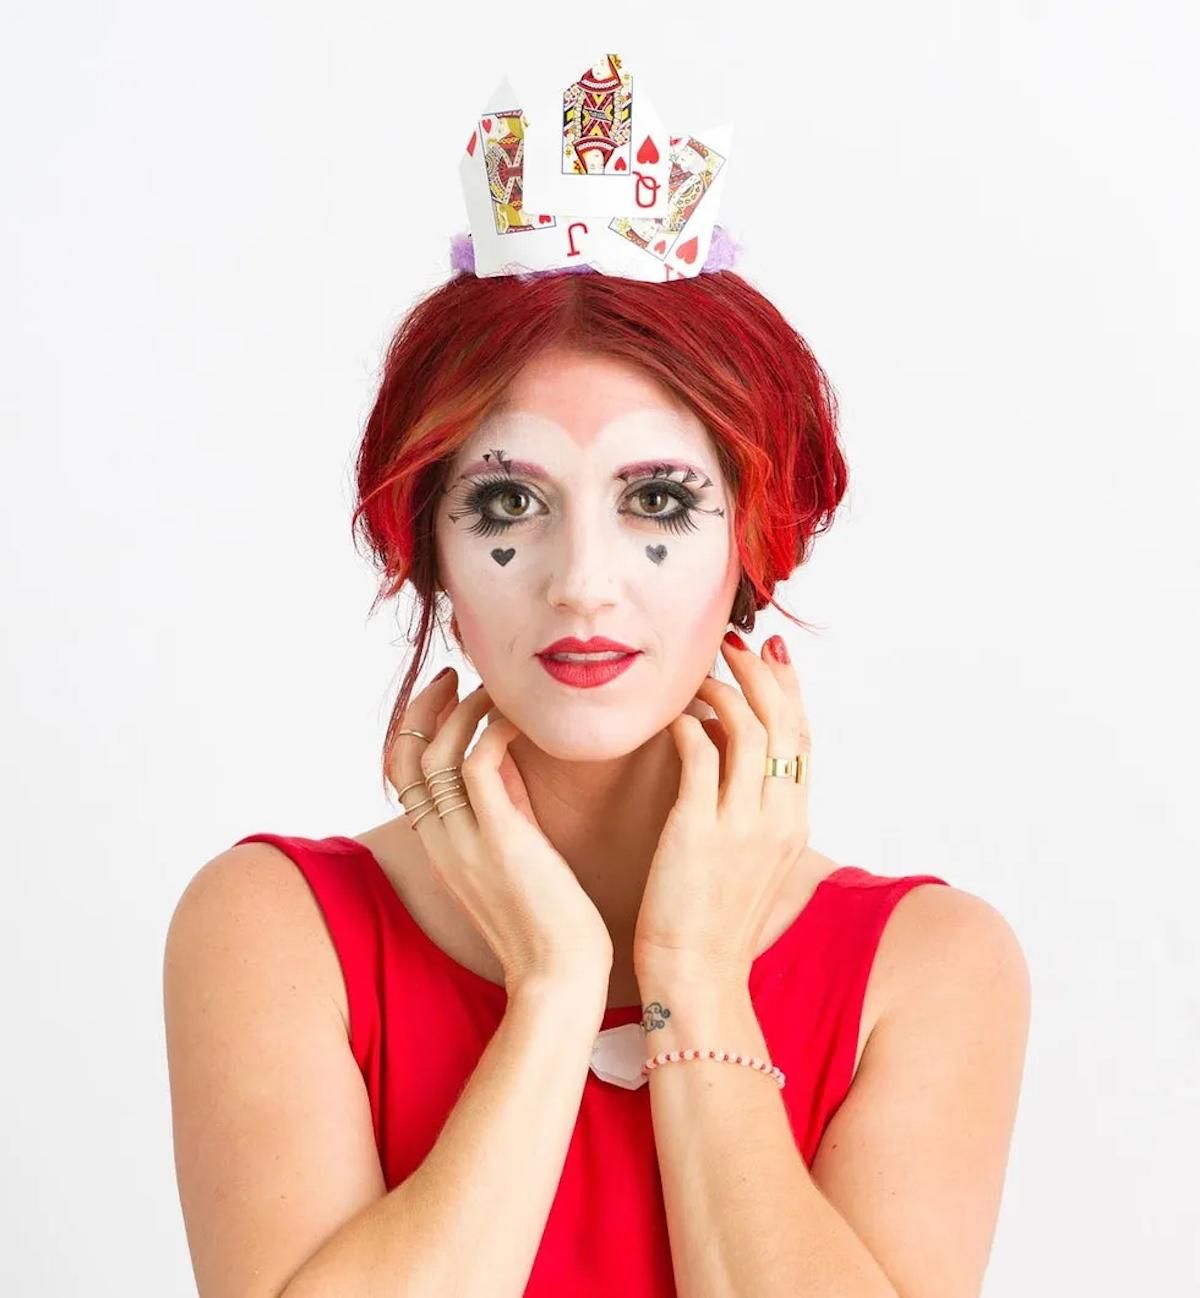 Seated women in red dress with red hair showing off the classic Queen of Hearts makeup and costume